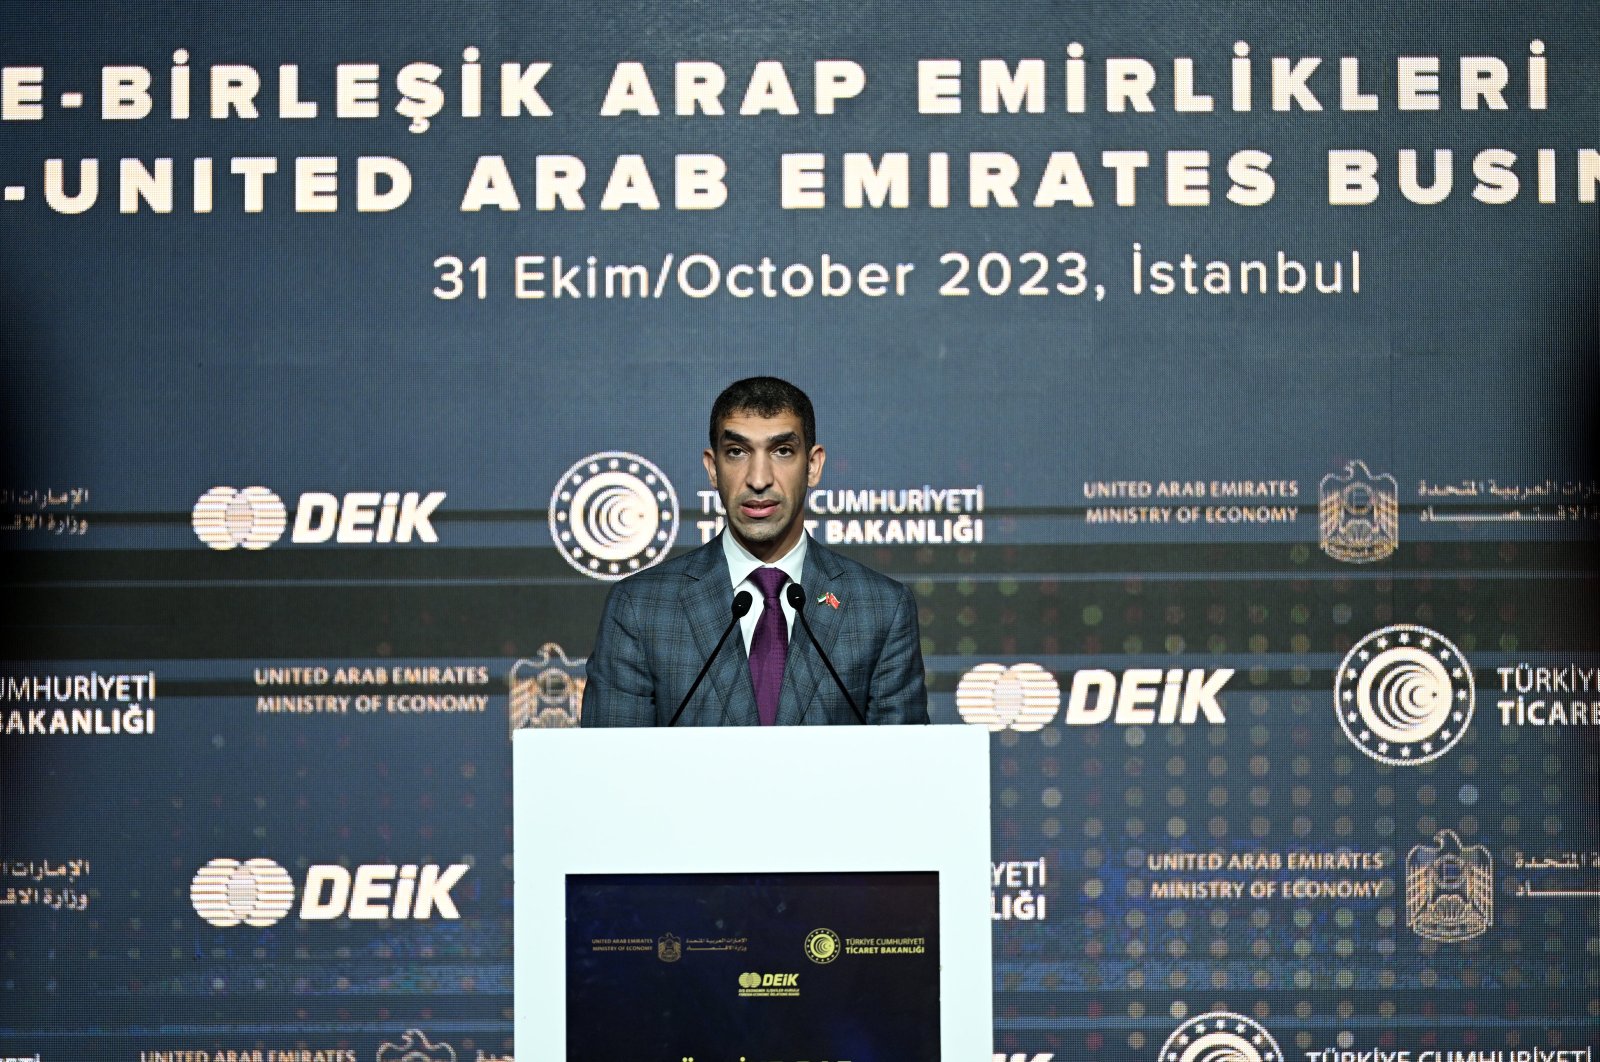 Thani Bin Ahmed Al Zeyoudi, the UAE’s minister of state for foreign trade, delivers a speech during the Türkiye-United Arab Emirates Business Forum, Istanbul, Türkiye, Oct. 31, 2023. (AA Photo)